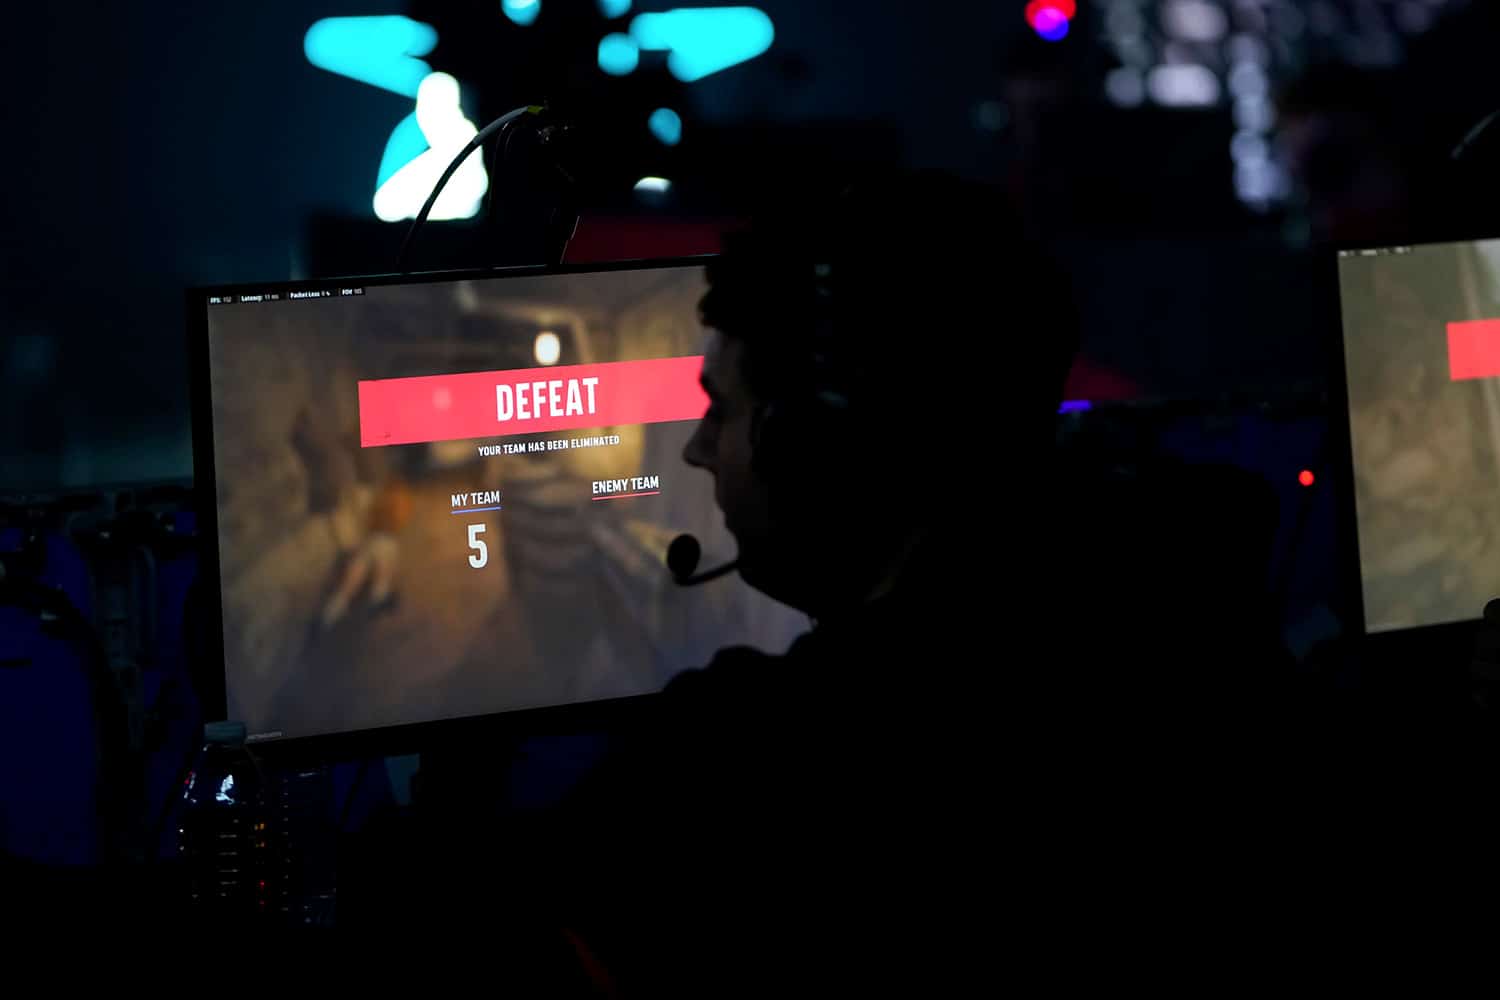 A defeat screen is show in front of a Call of Duty professional player during a tournament after a competitive match.